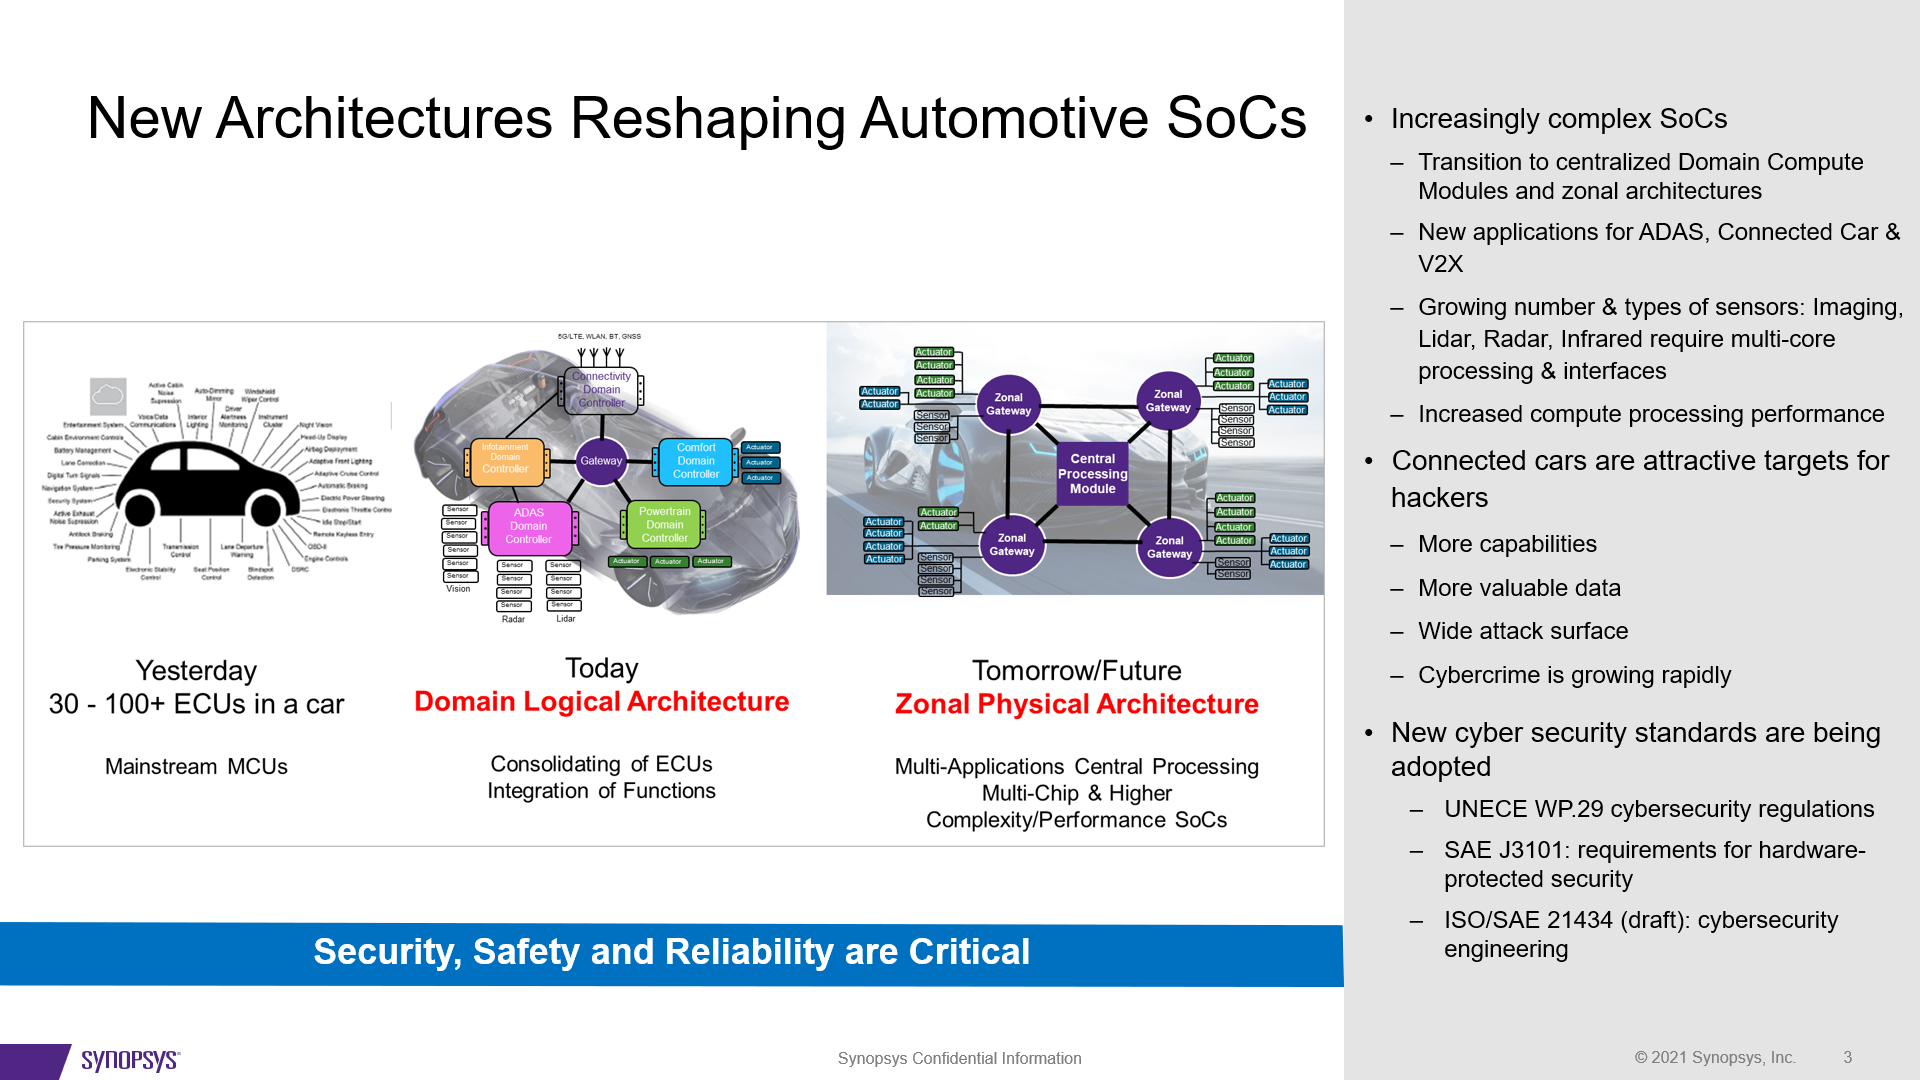 New Architectures Reshaping Auto SoCs